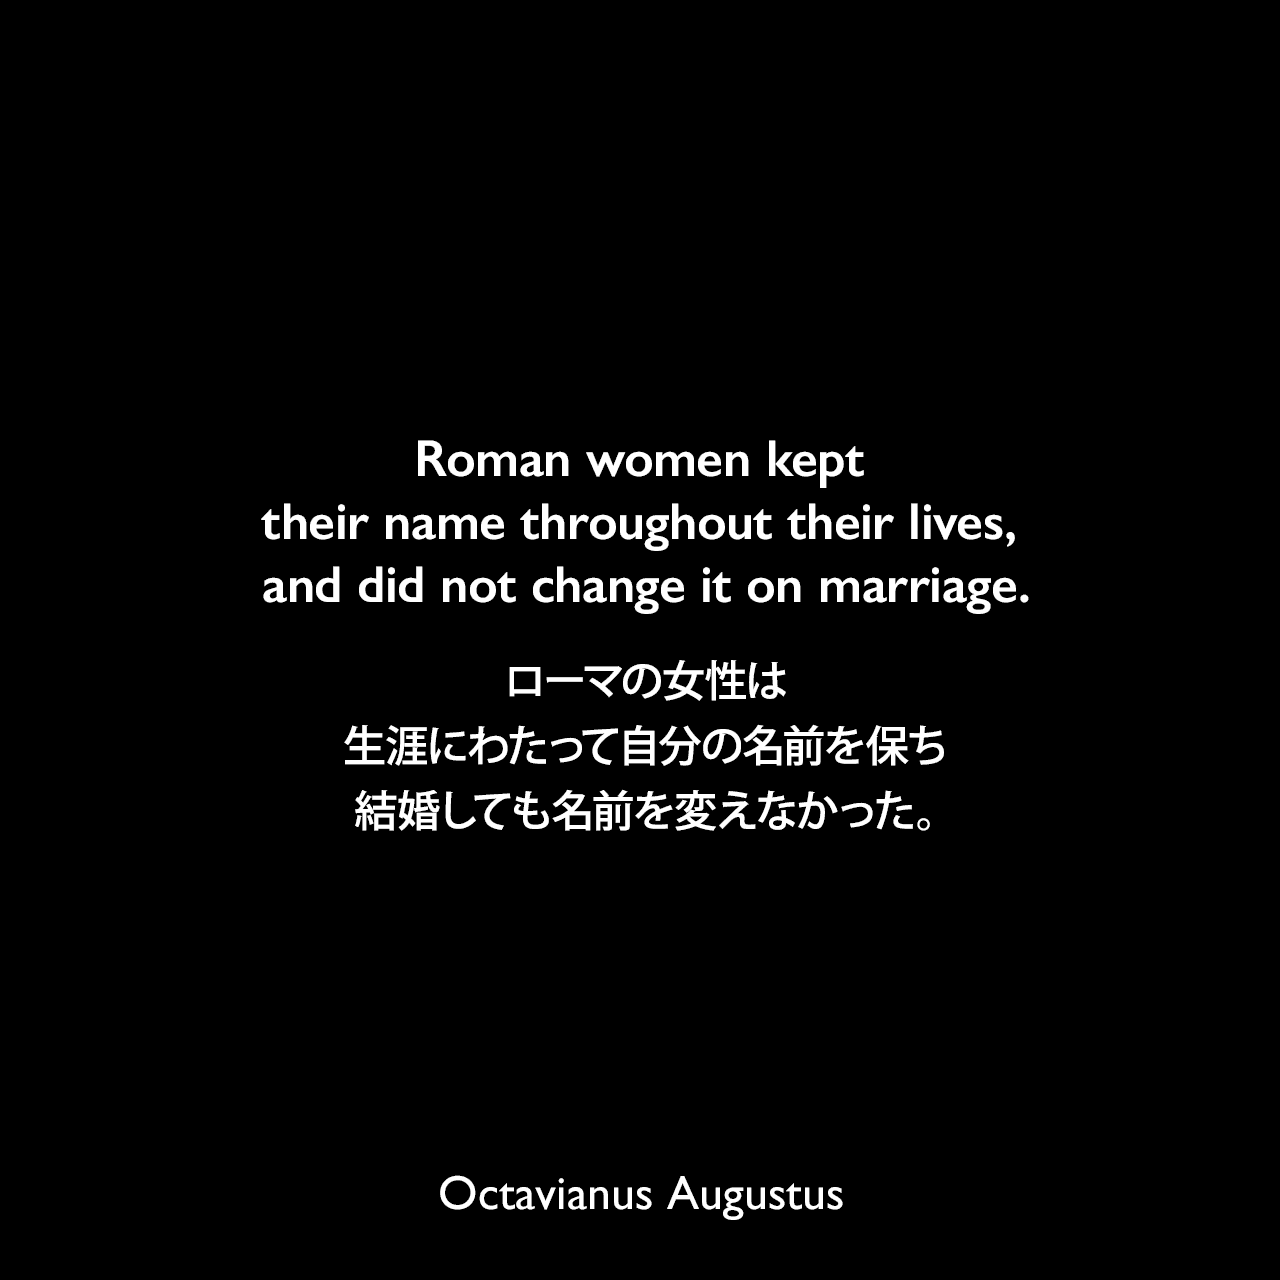 Roman women kept their name throughout their lives, and did not change it on marriage.ローマの女性は生涯にわたって自分の名前を保ち、結婚しても名前を変えなかった。- 歴史学者エイドリアン・ゴールズワーシーによる本「Augustus: First Emperor of Rome」よりOctavianus Augustus